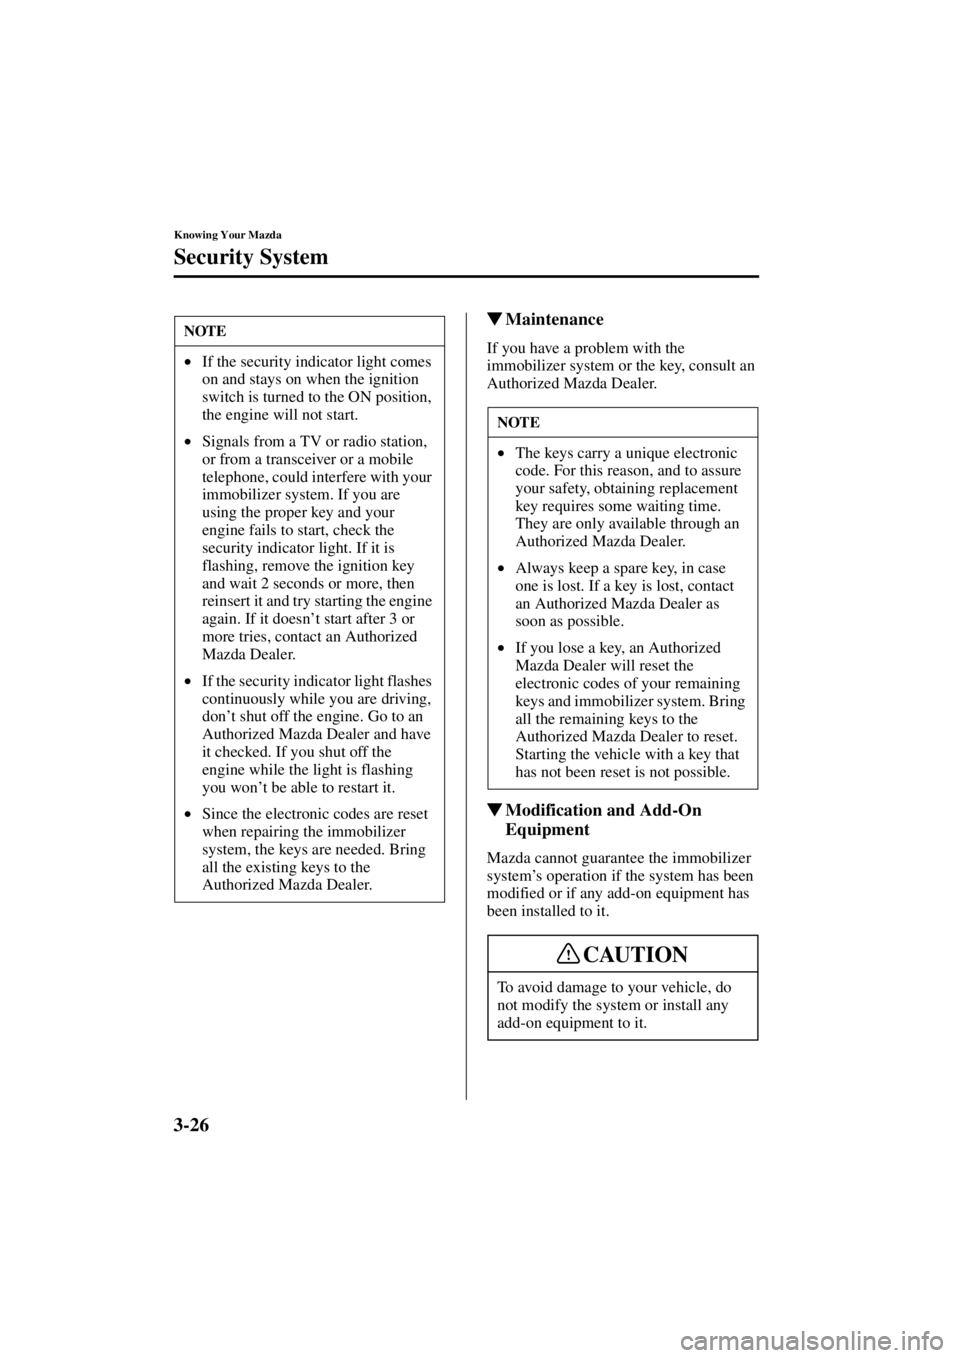 MAZDA MODEL 3 5-DOOR 2004 Owners Guide 3-26
Knowing Your Mazda
Security System
Form No. 8S18-EA-03I
Maintenance
If you have a problem with the 
immobilizer system or the key, consult an 
Authorized Mazda Dealer.
Modification and Add-On 
